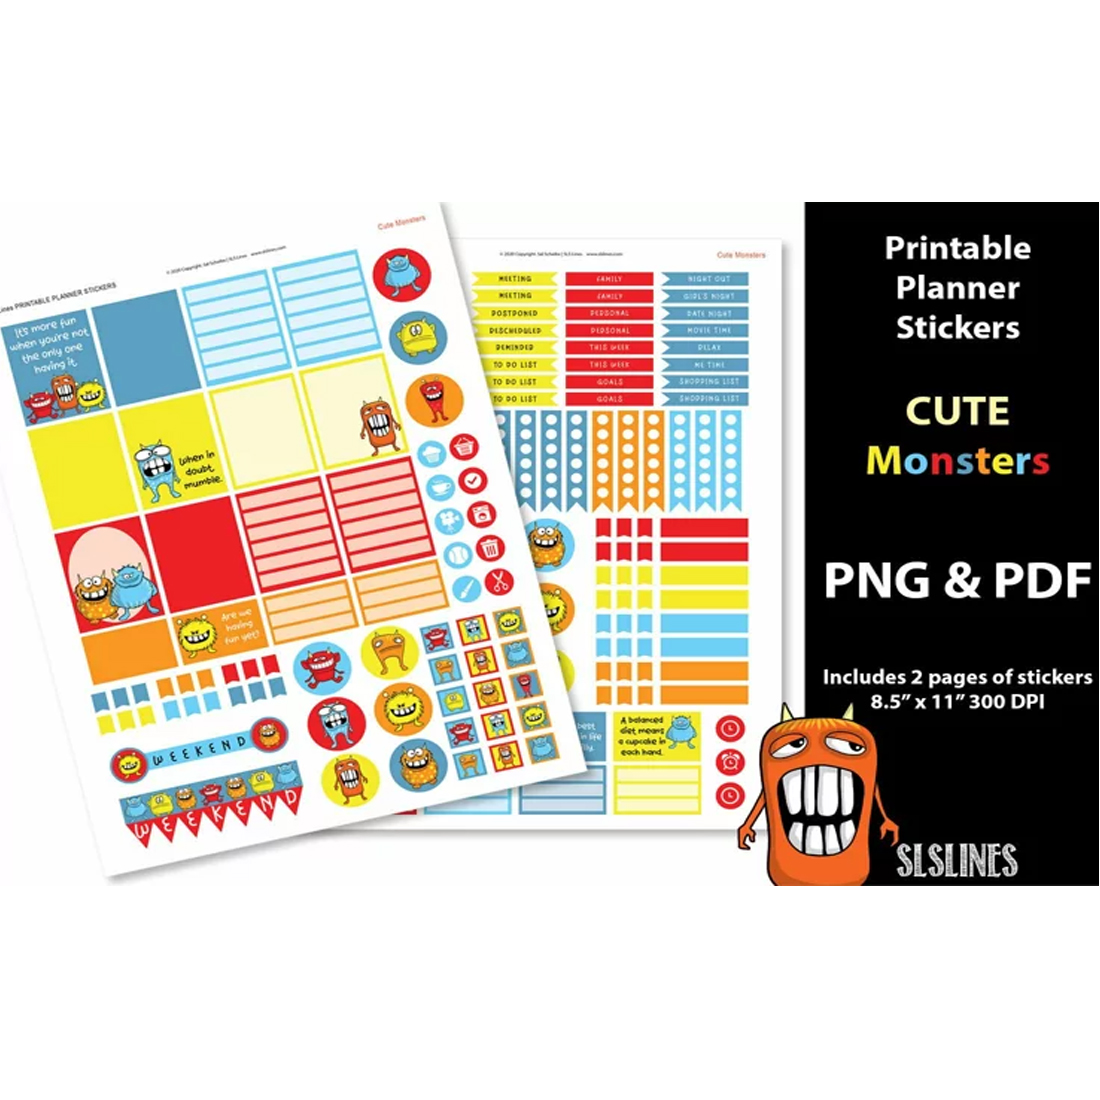 Printable Planner Stickers - Cute Monsters cover image.